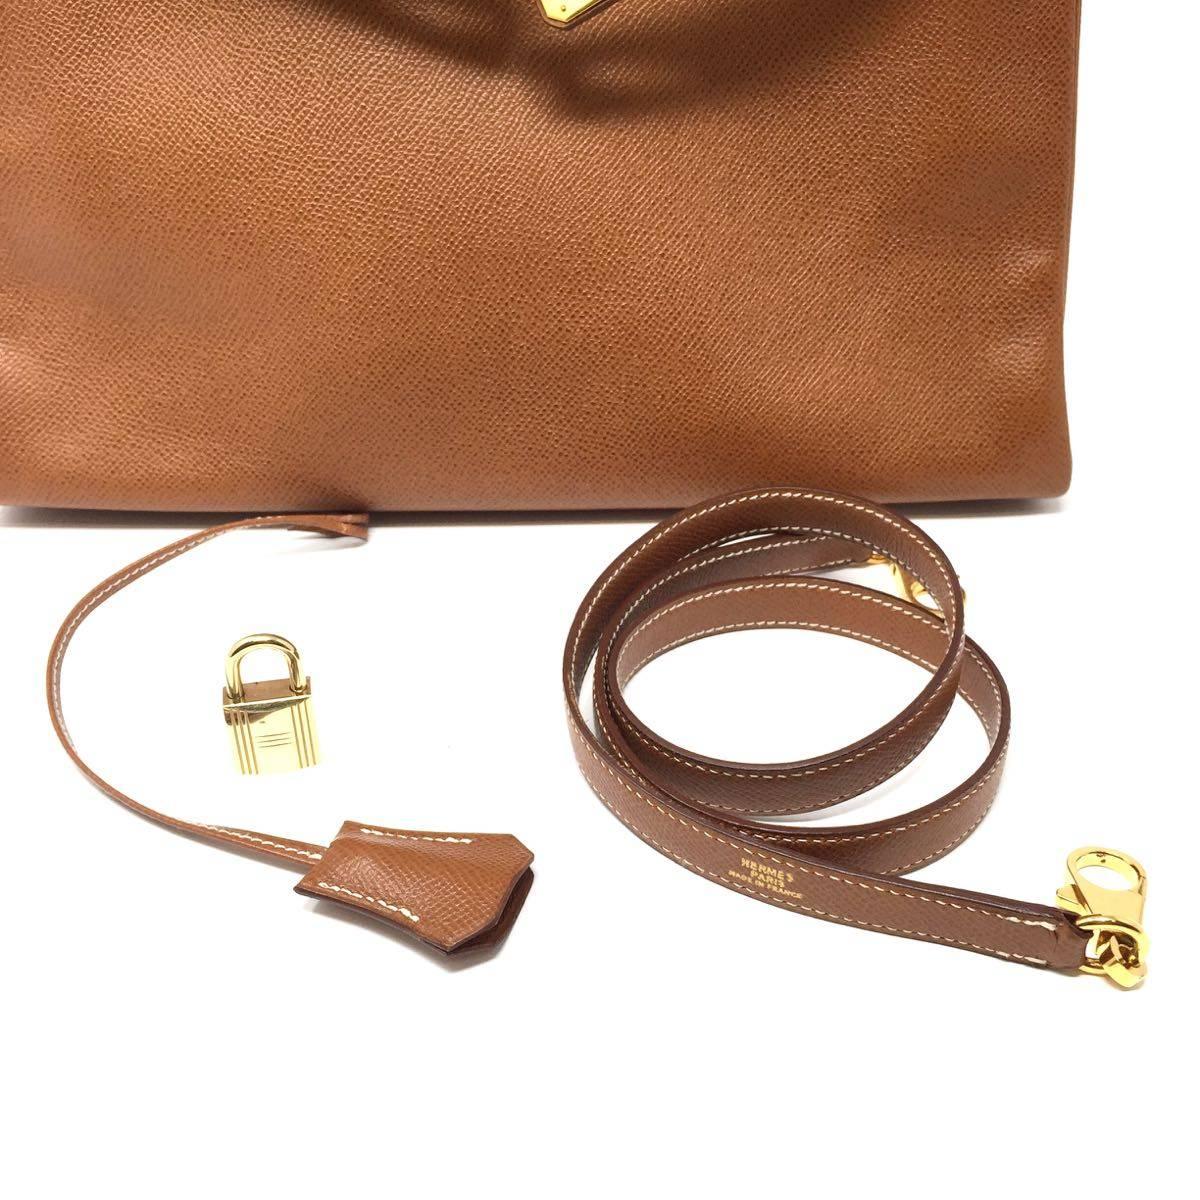 1992, HERMES Vintage  Sac Kelly 32 bag in Courchevel Gold Leather.  4